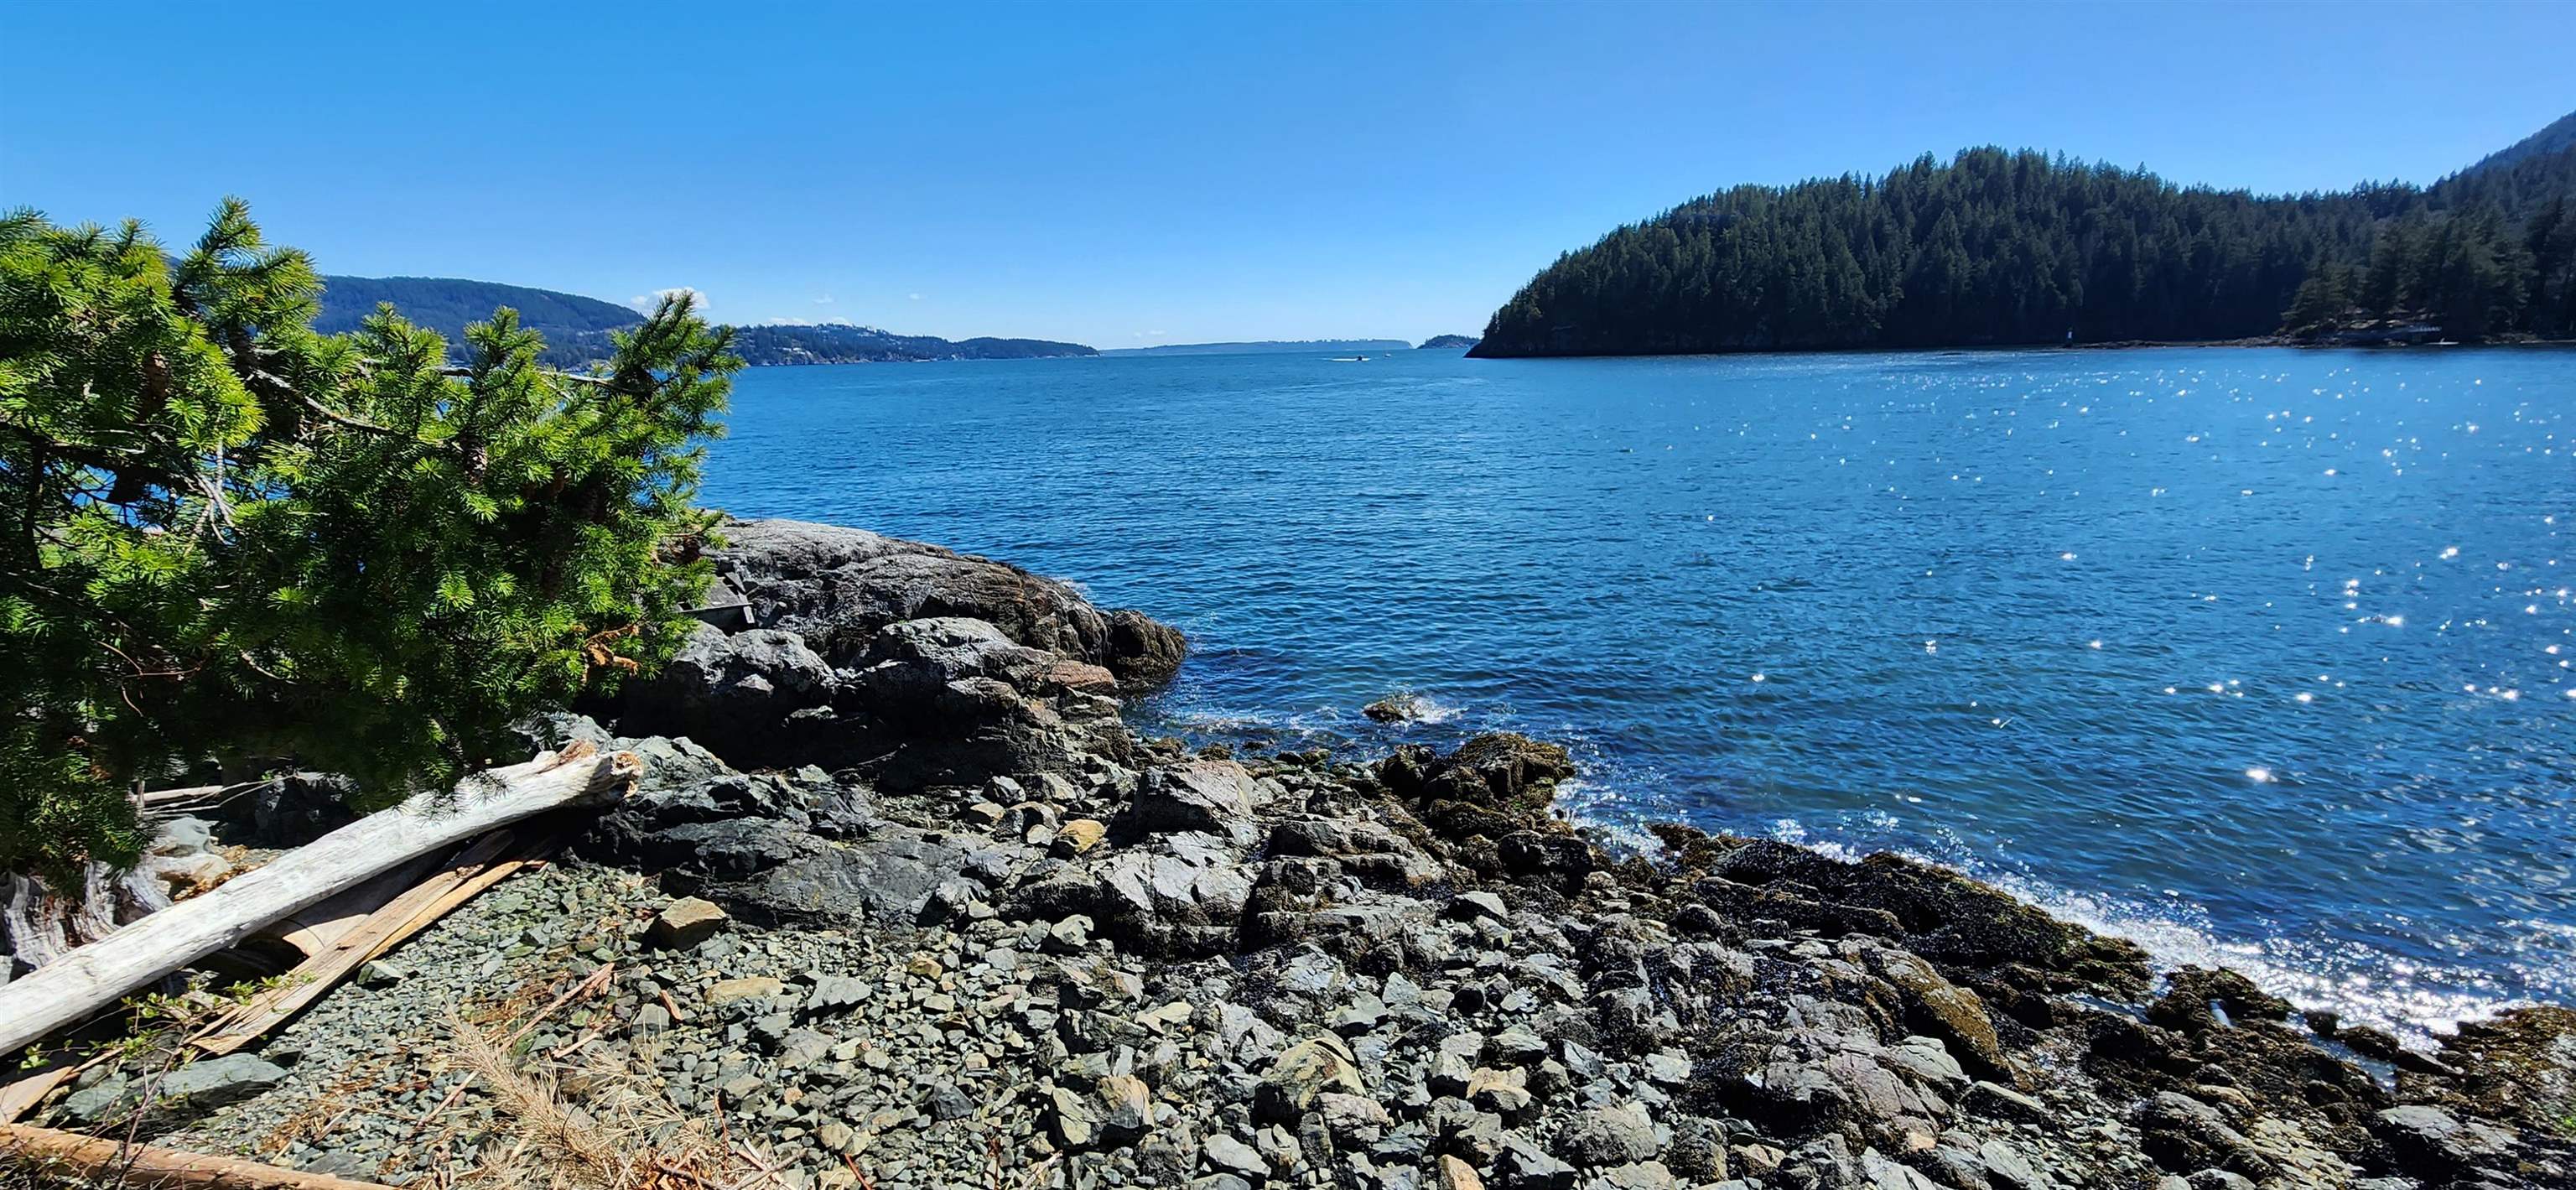 The perfect beach to launch your Kayak or paddle board from or go for a swim. You could Kayak to Snug Cove for coffee or accross to Horseshoe Bay for a drink